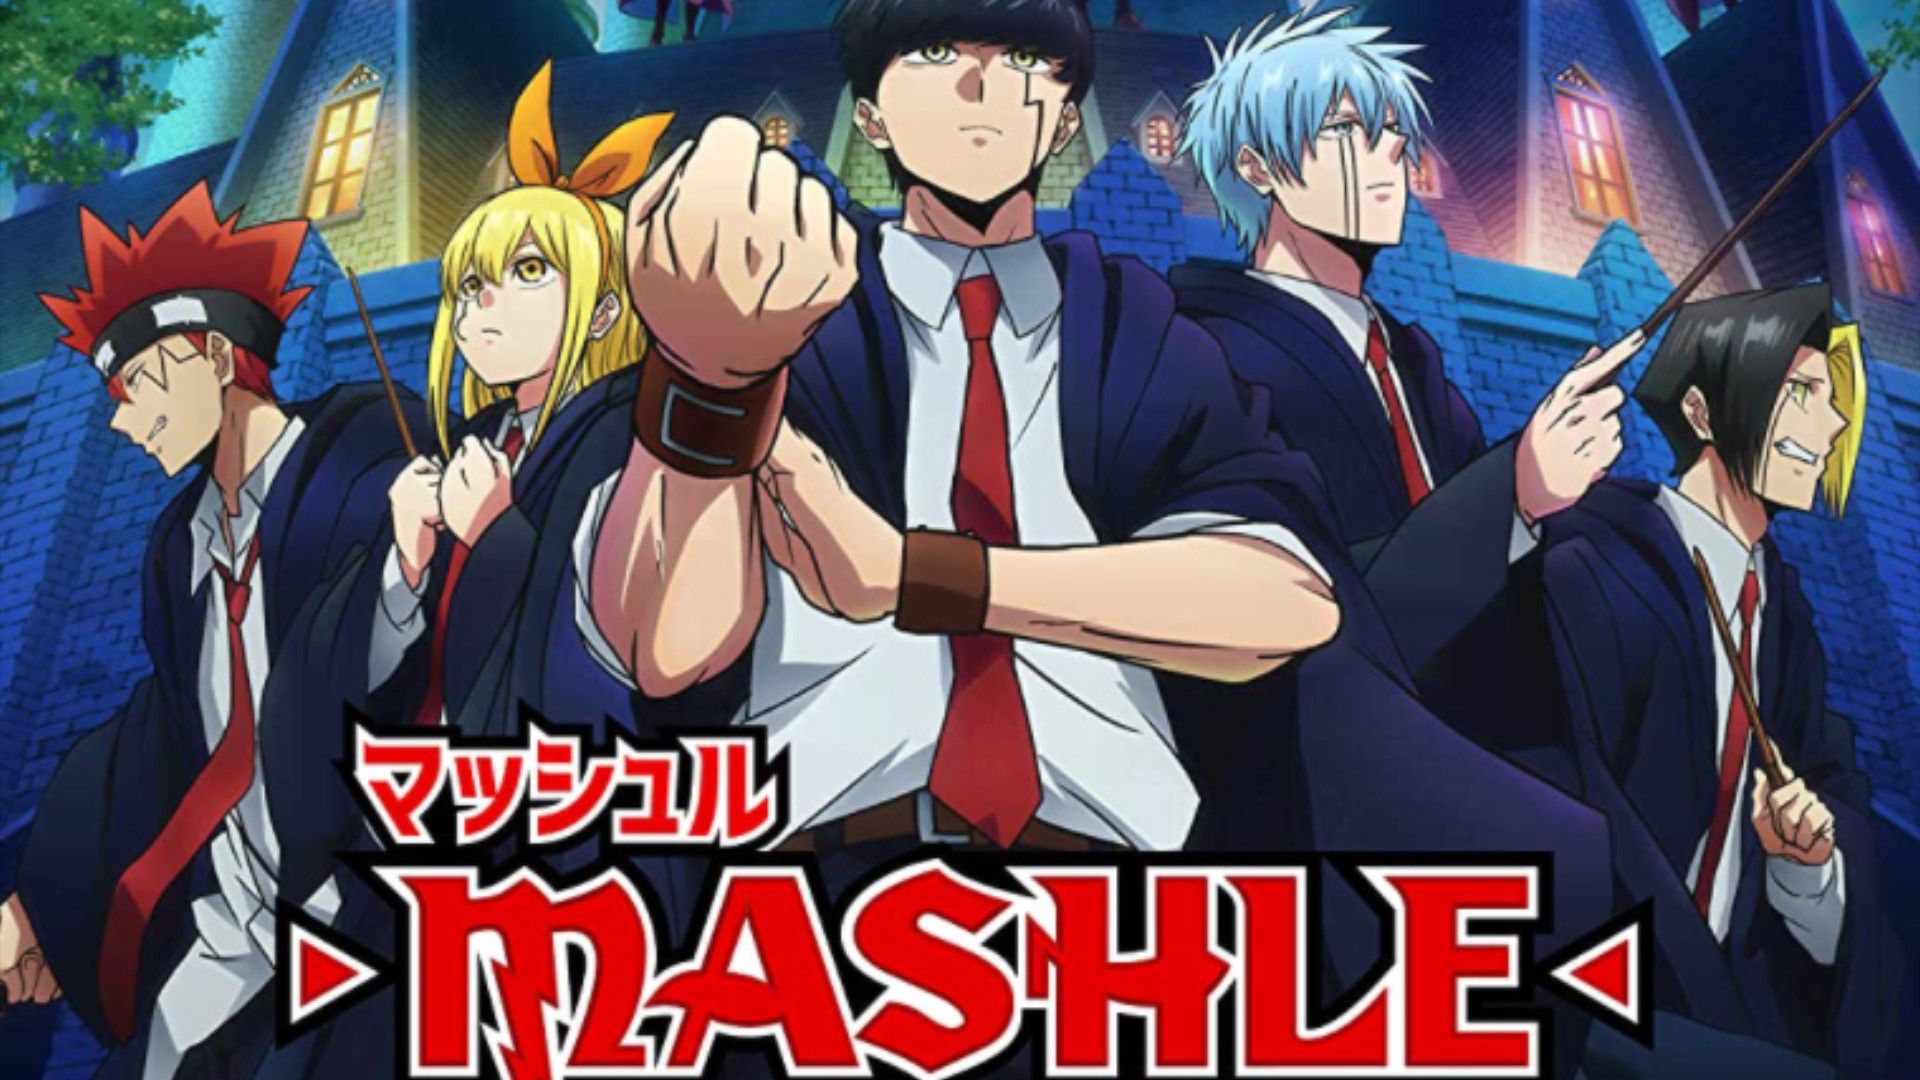 Assistir Mashle: Magic and Muscles Episodio 12 Online